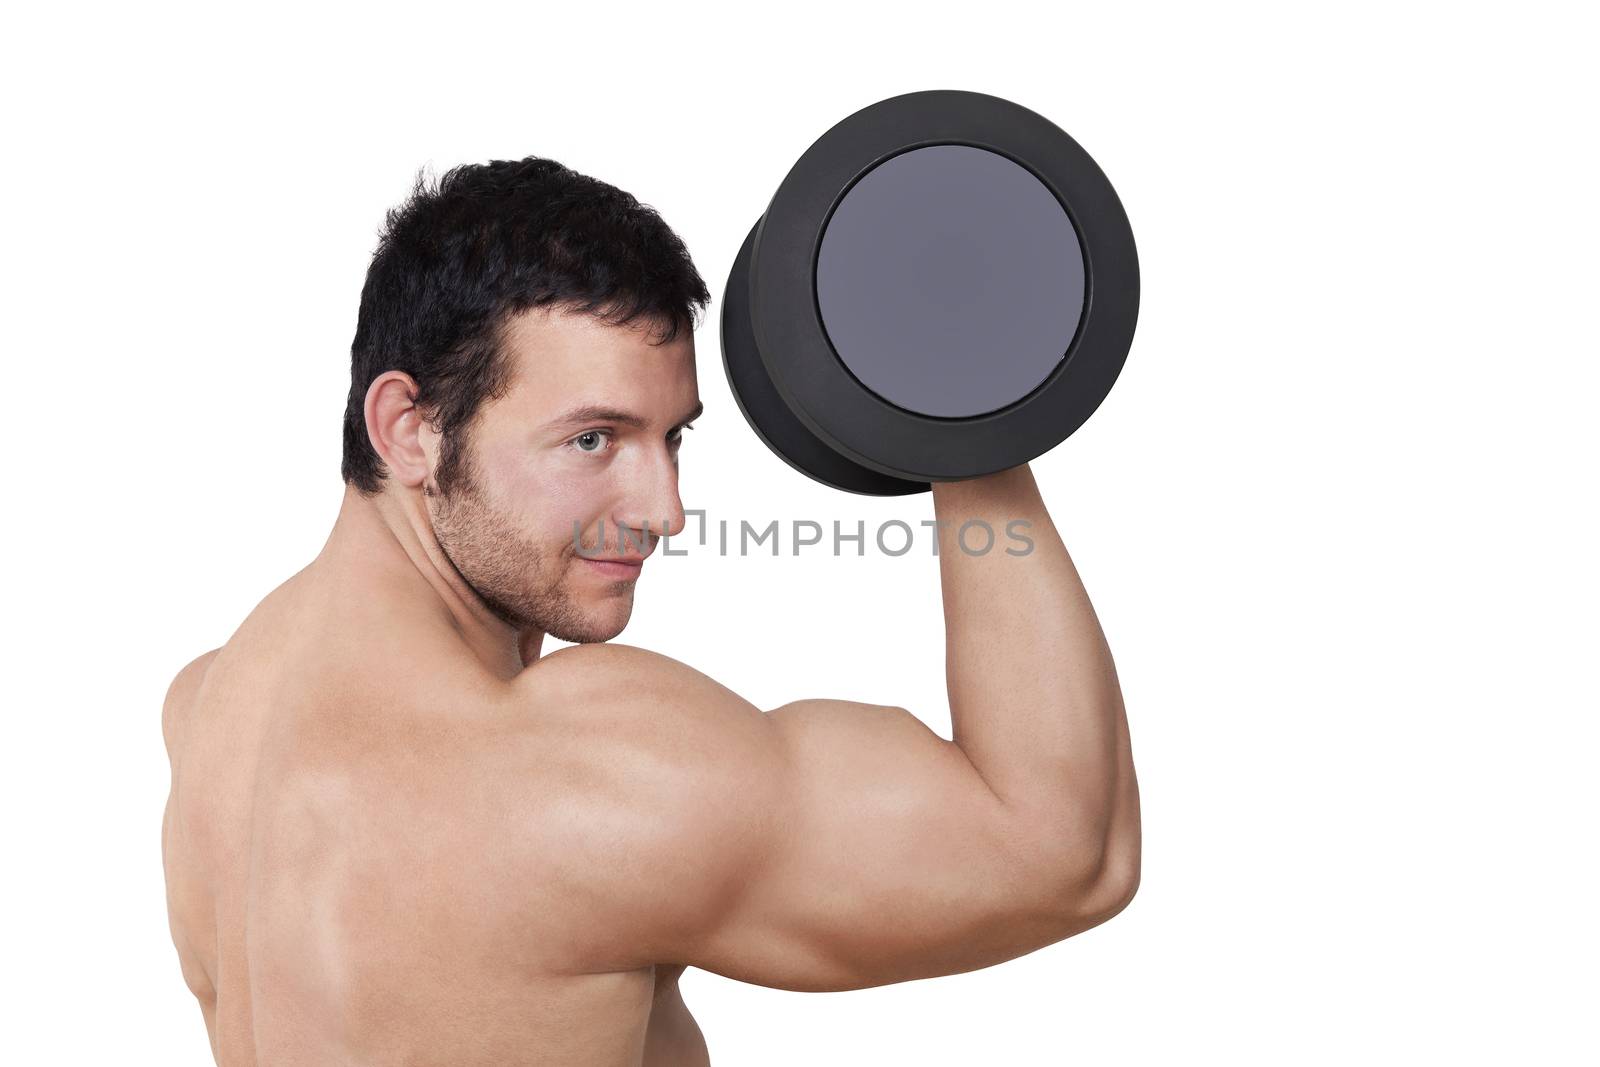 Attractive shirtless bodybuilder lifting dumbbell isolated on white background. Muscle and bodybuilding concept.